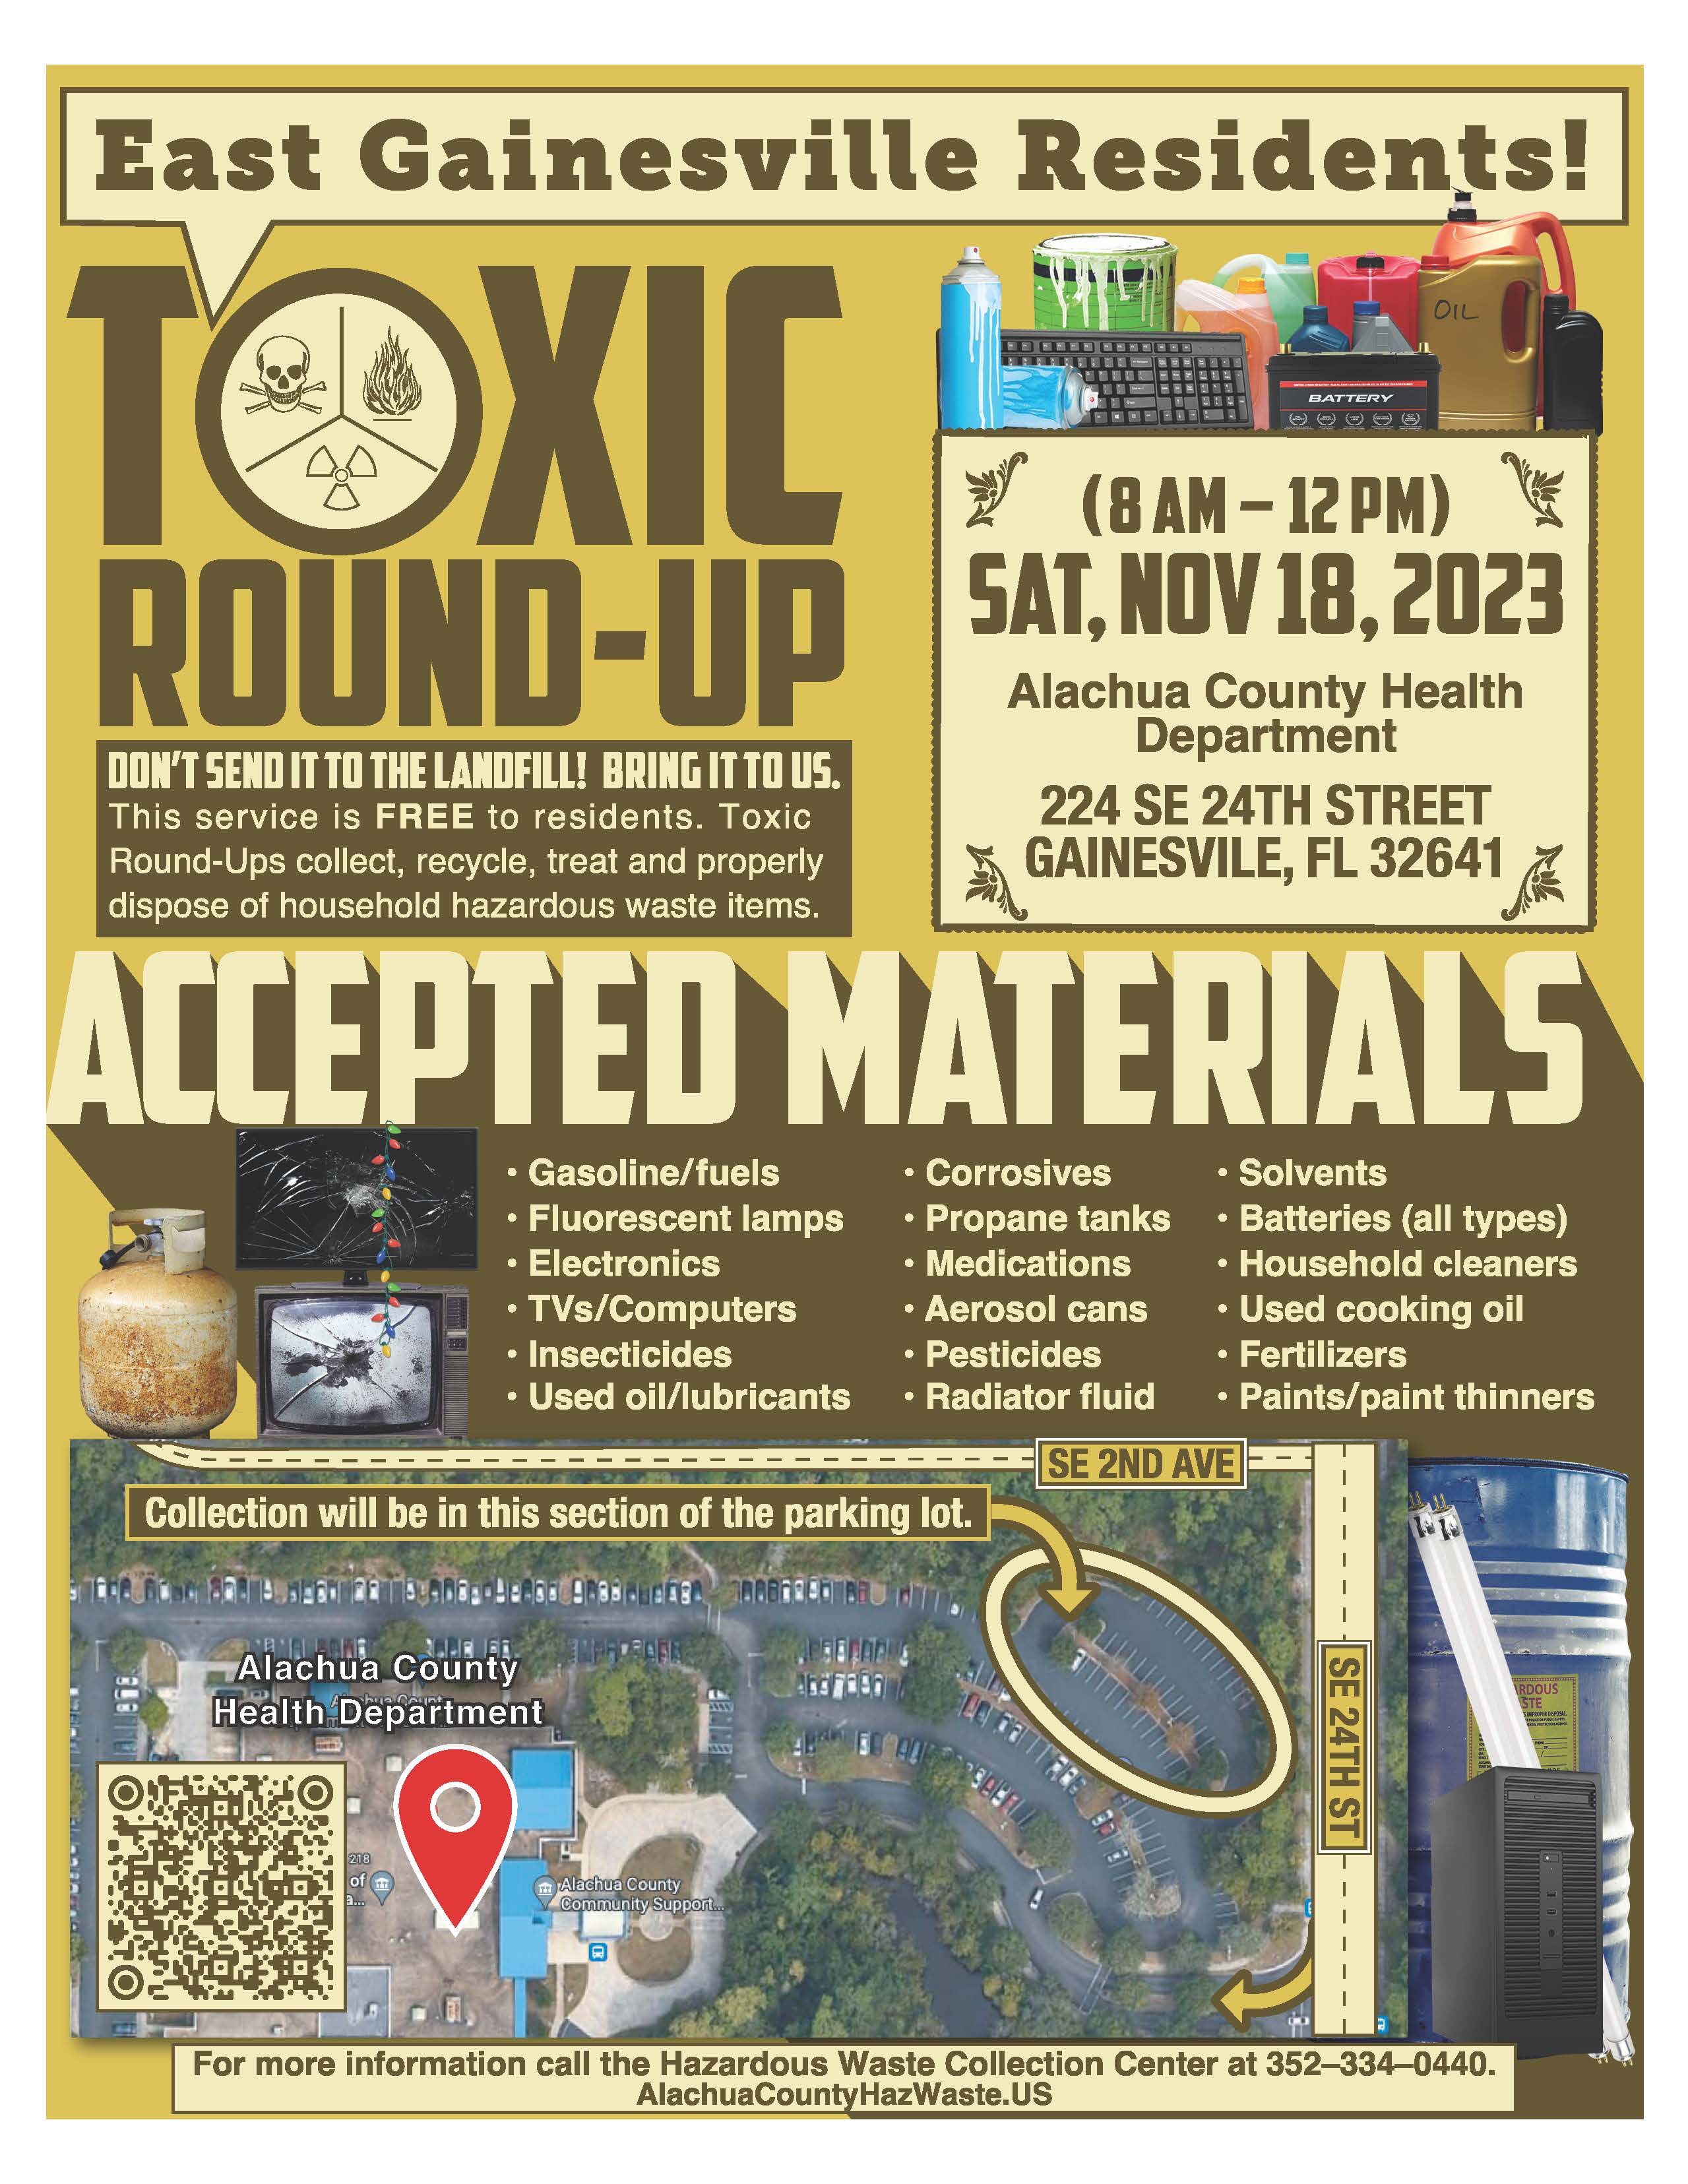 Toxic Round-Up on Saturday November 18, 2023 from 8am-12pm at Alachua County Health Department. 224 SE 24th Street Gainesville, FL 32641